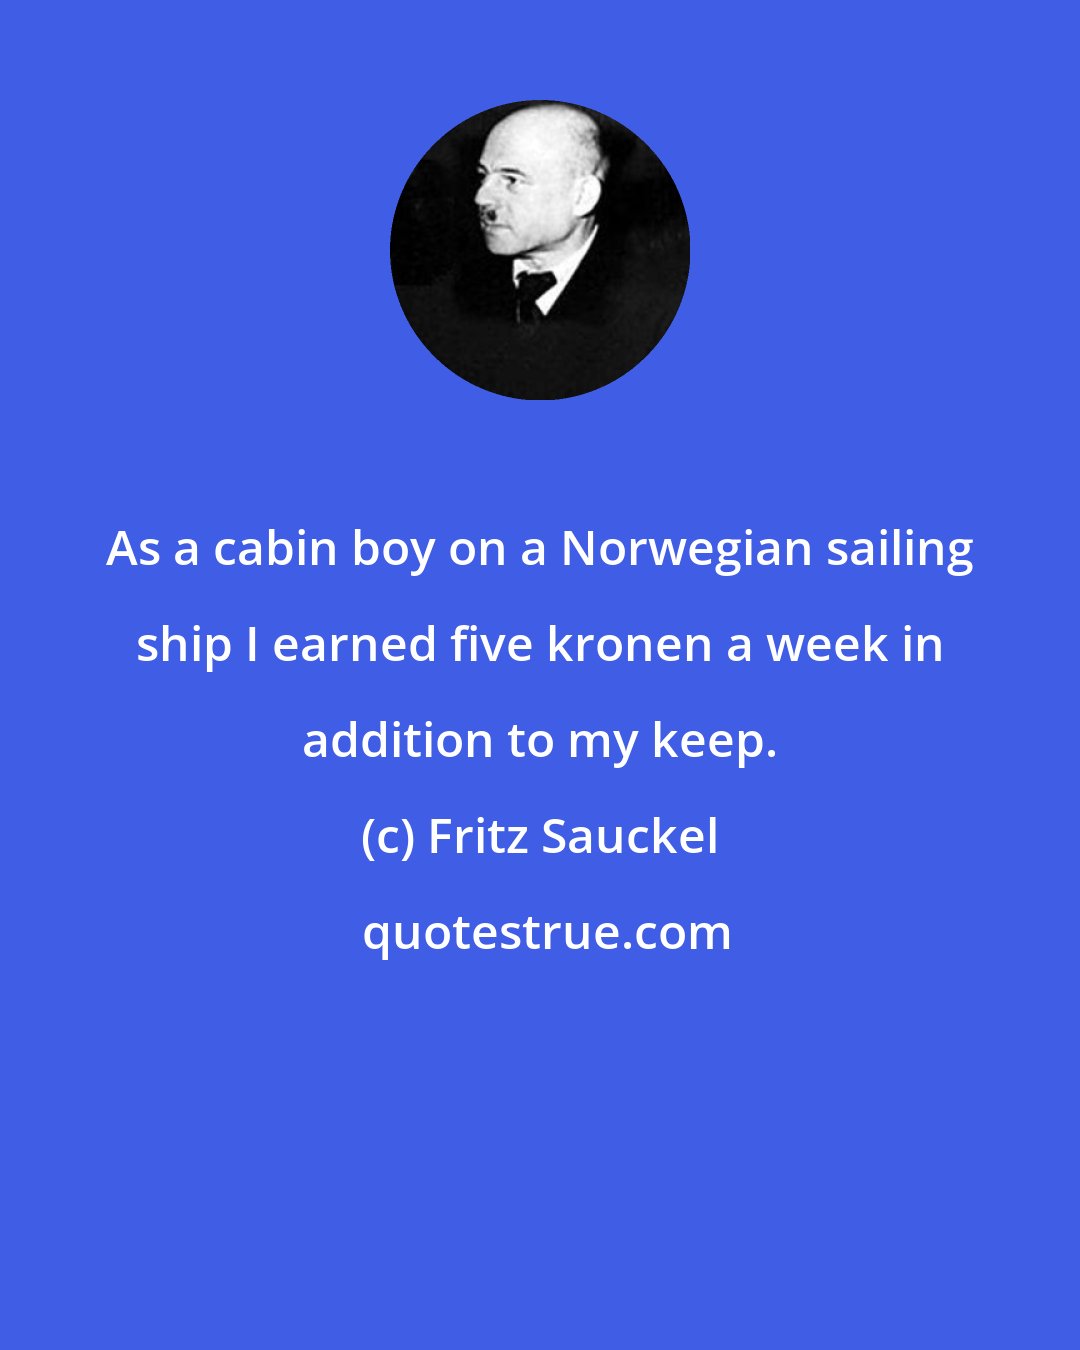 Fritz Sauckel: As a cabin boy on a Norwegian sailing ship I earned five kronen a week in addition to my keep.